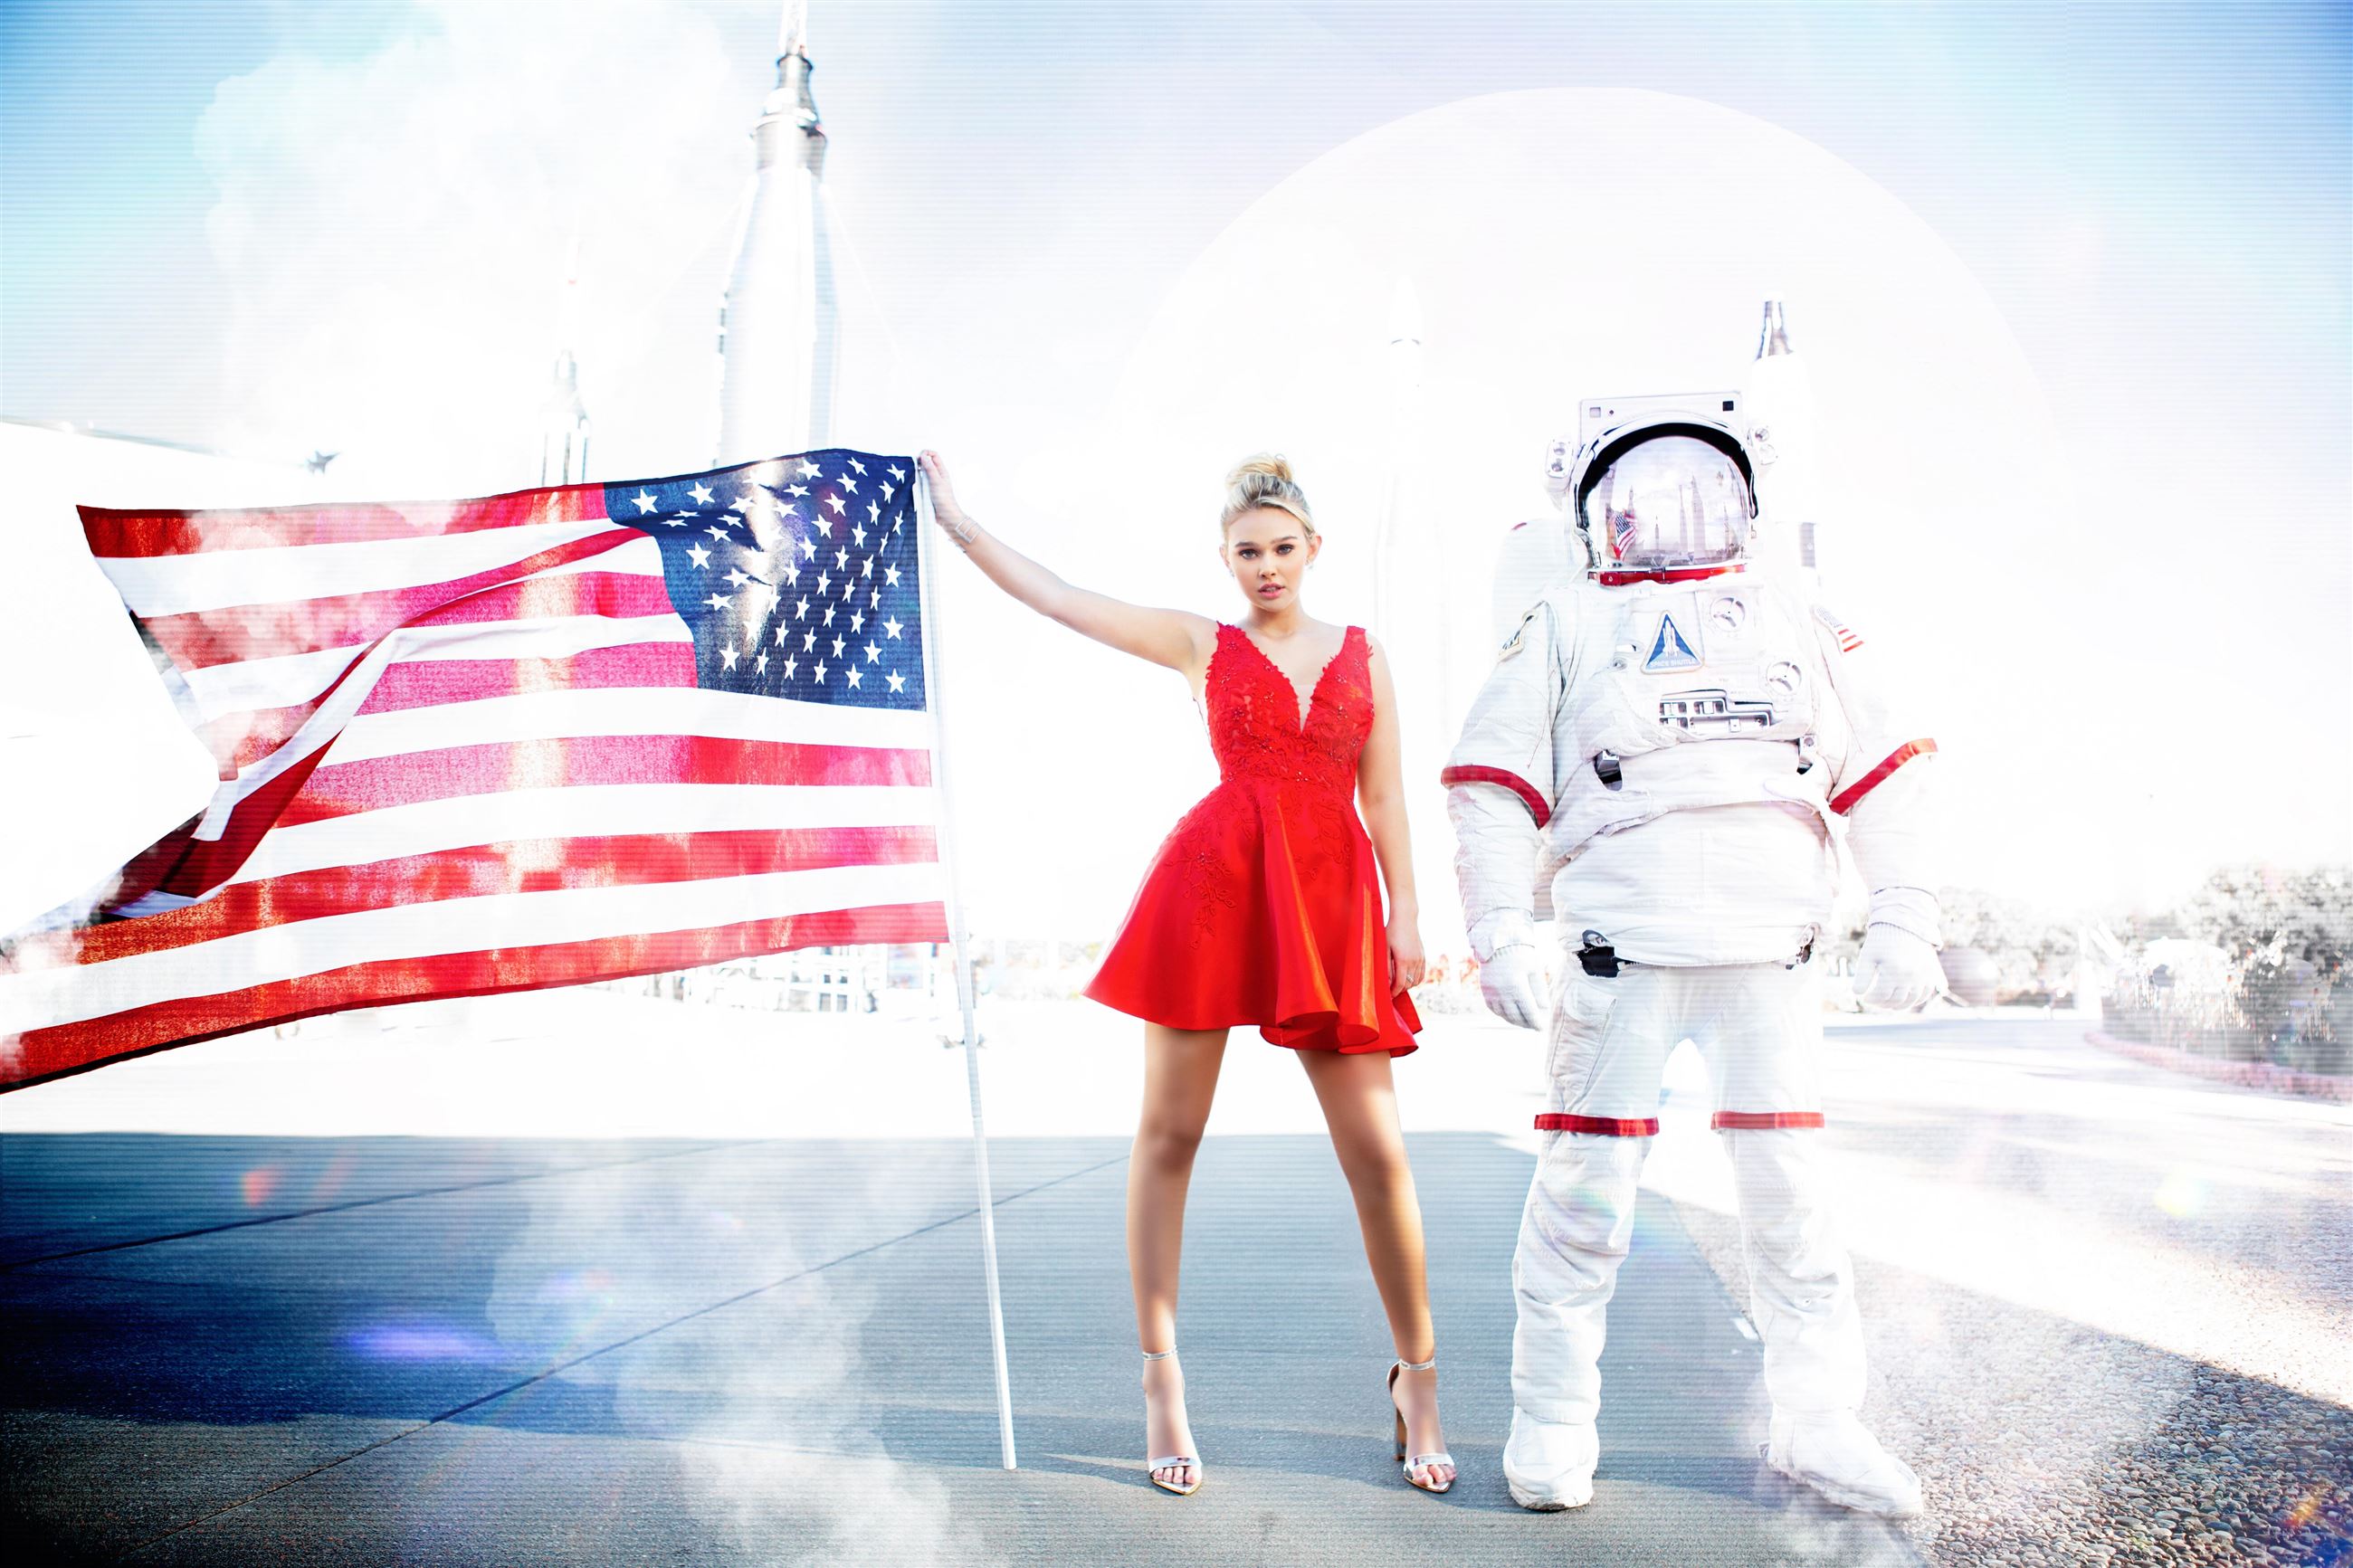 Girl next to astronaut and American flag wearing short red dress